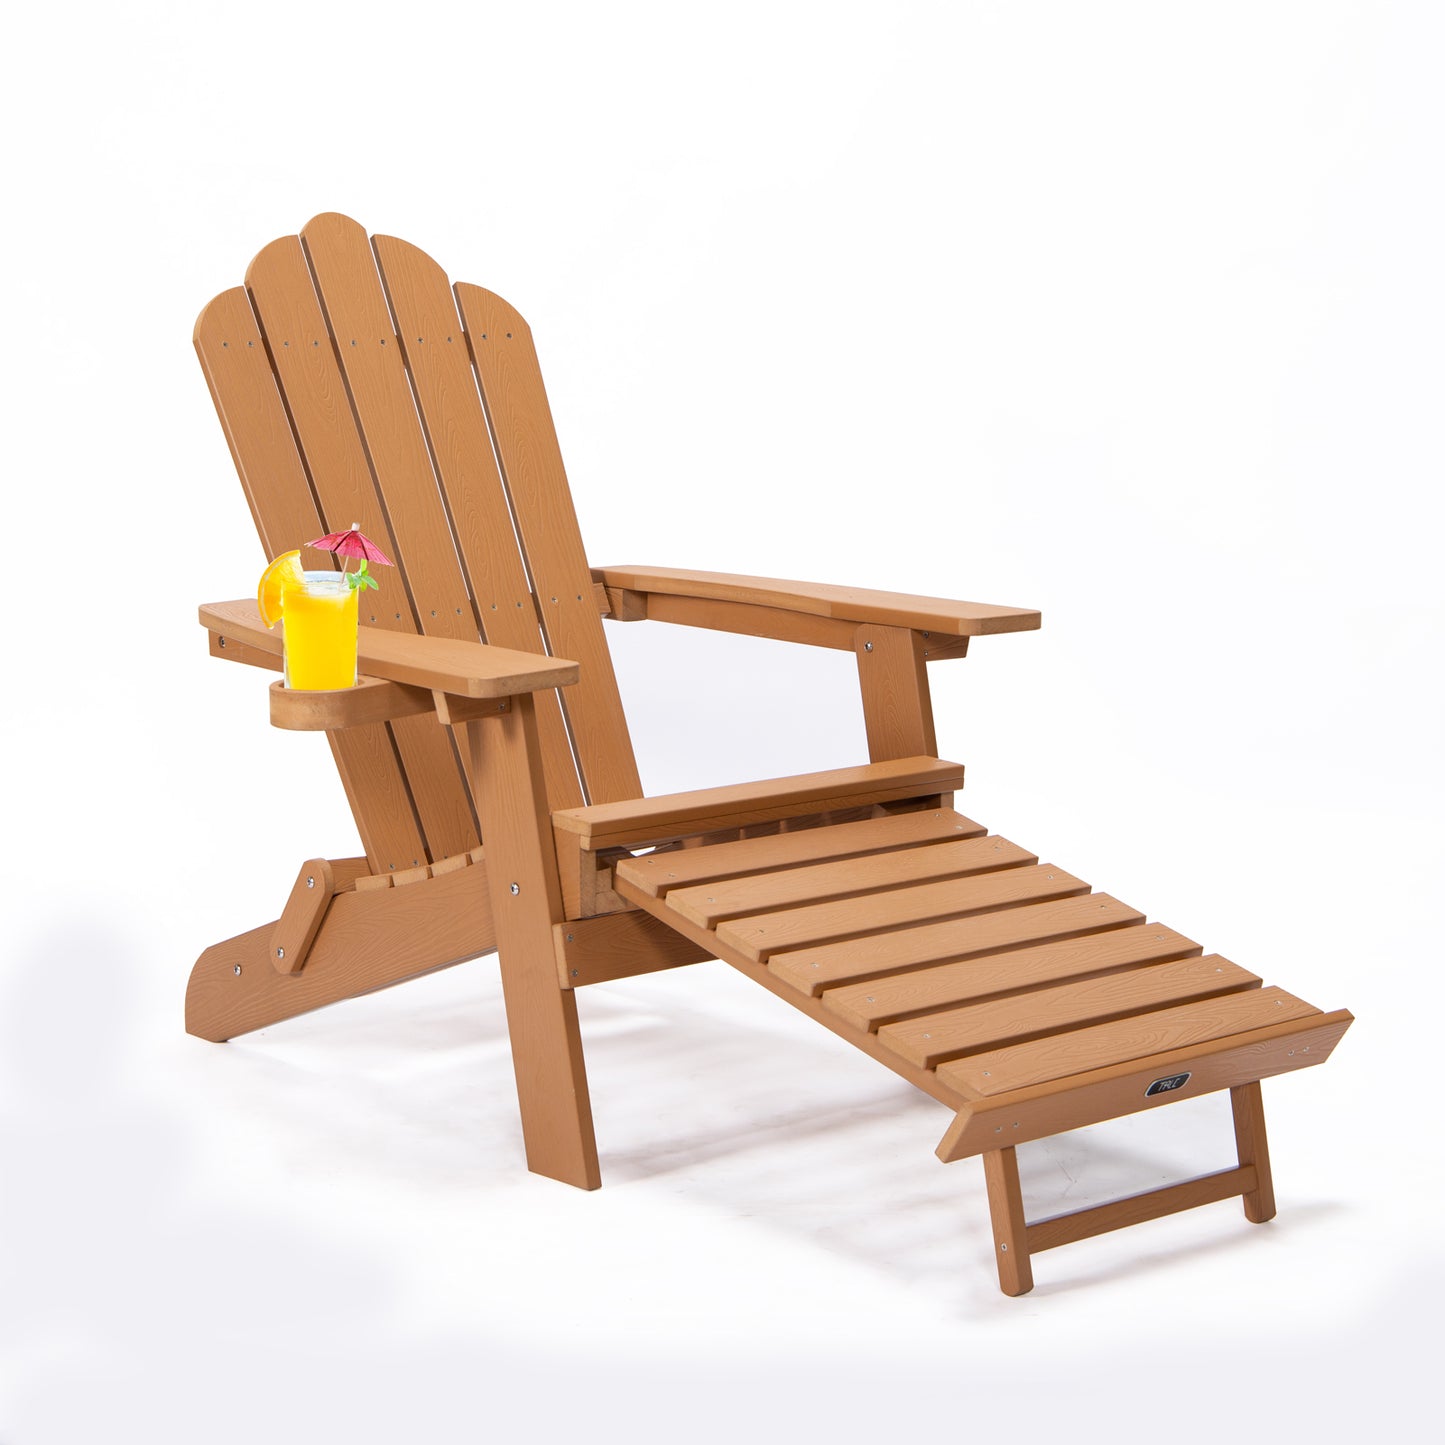 TALE Folding Adirondack Chair with Pullout Ottoman with Cup Holder, Oversized, Poly Lumber,  for Patio Deck Garden, Backyard Furniture, Easy to Install,BROWN. Ban on Amazon